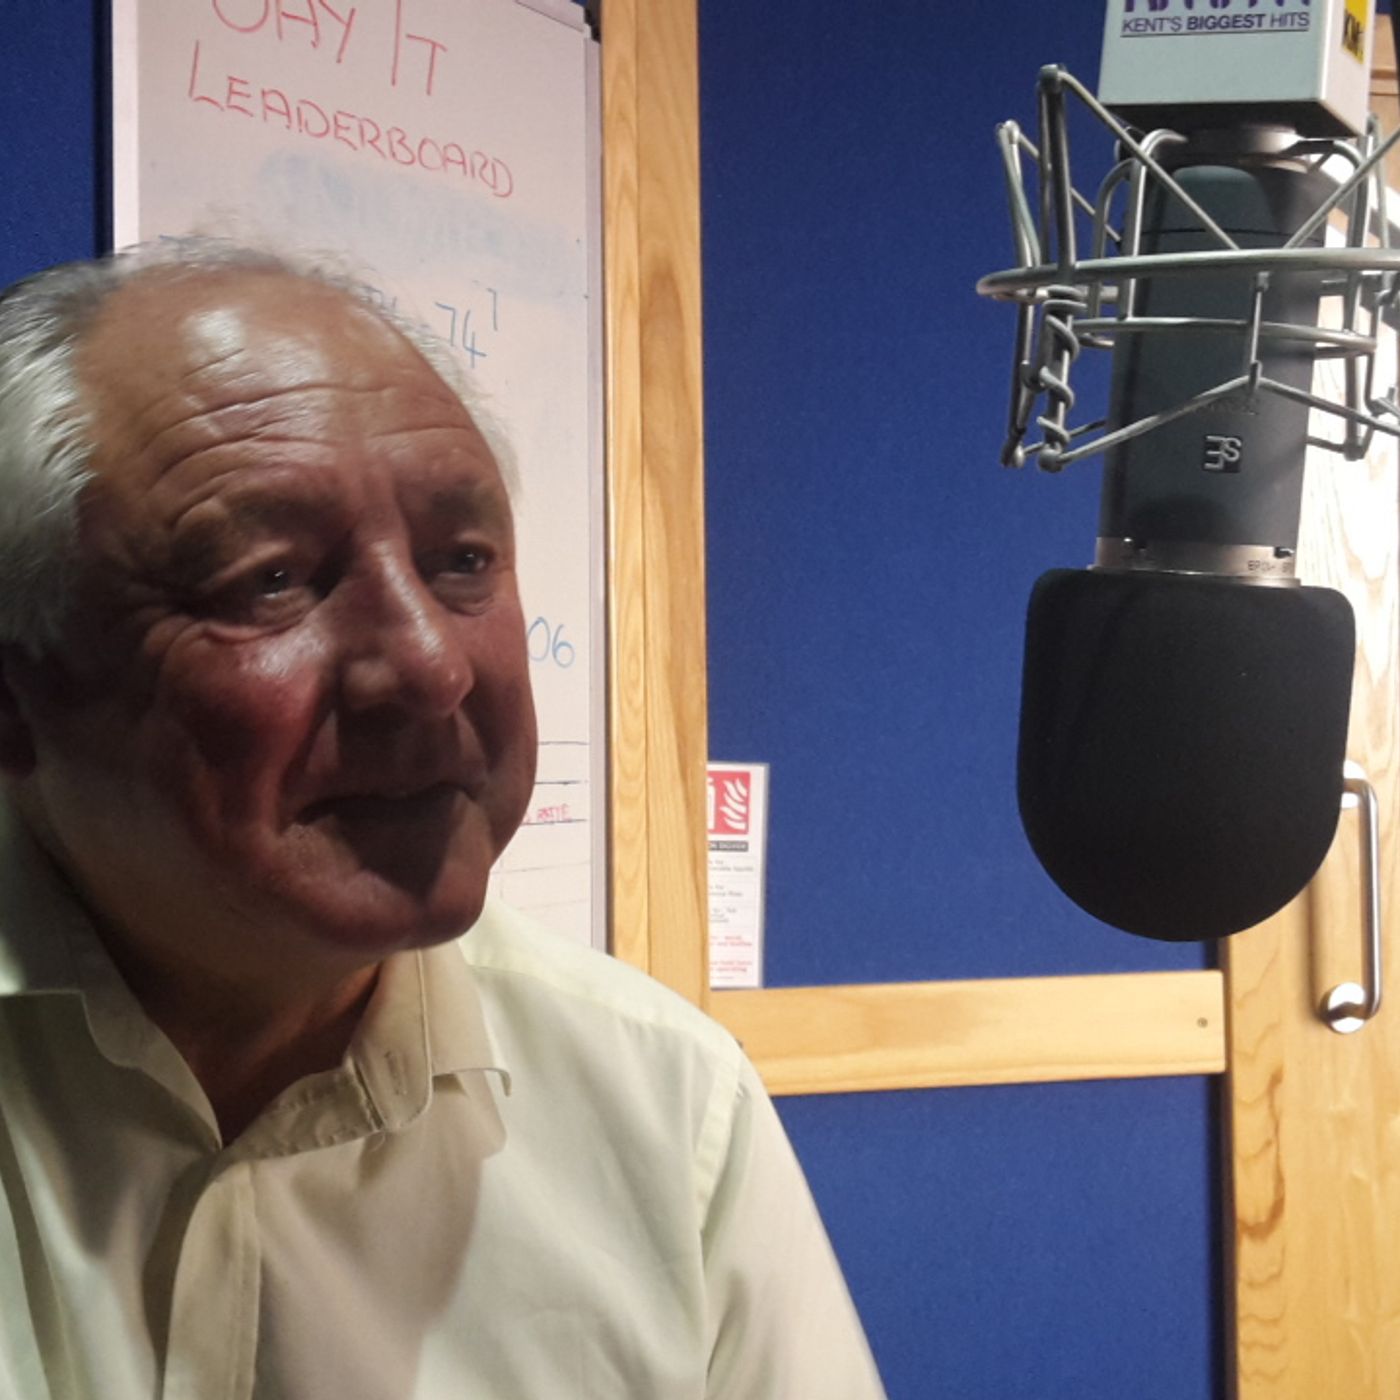 36: Neil Cugley joins the KM Sports Team to discuss the highlights of his extraordinary career - and the devastating low point